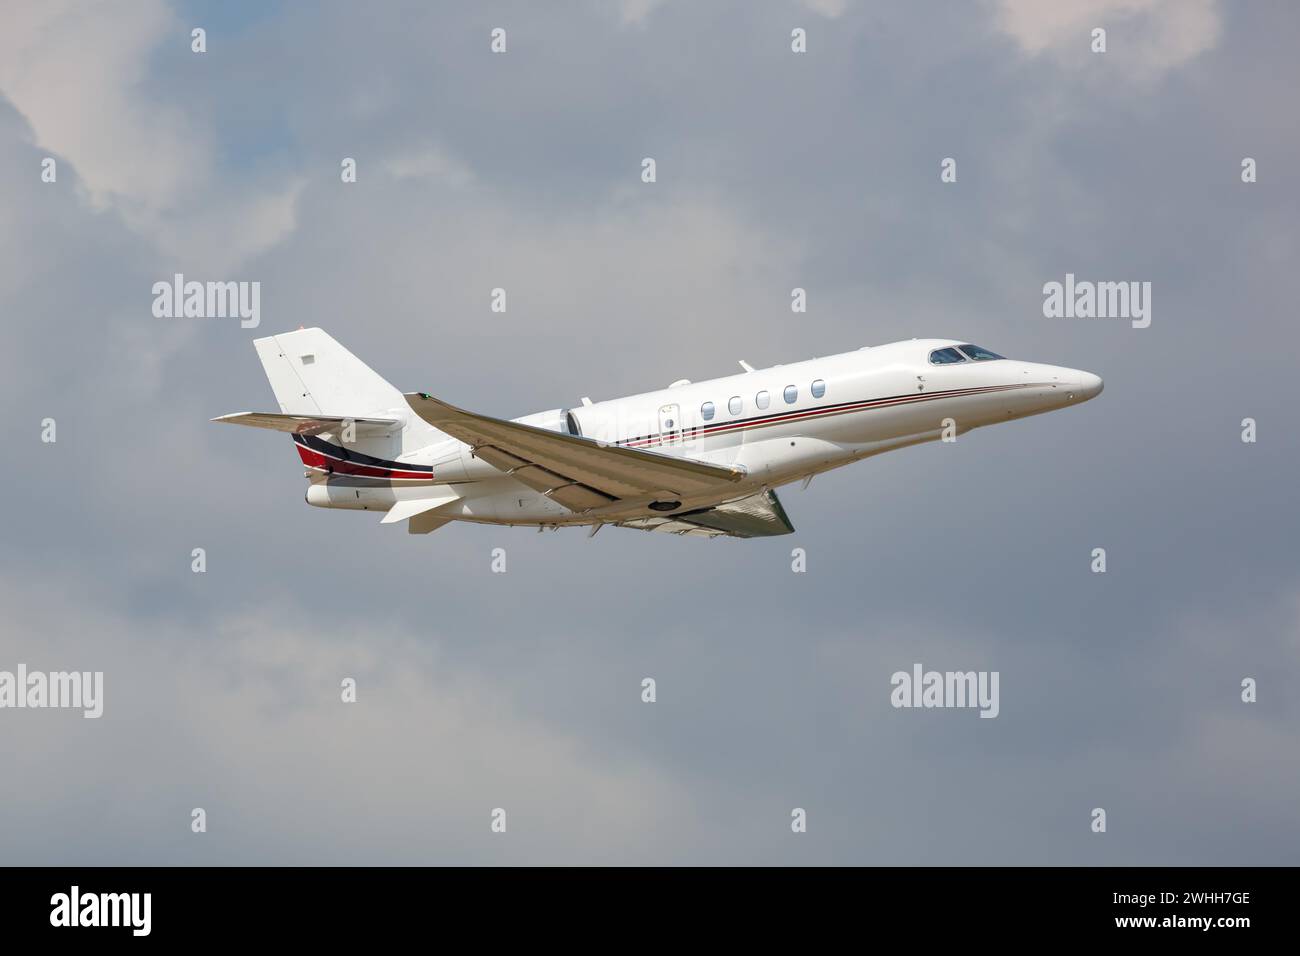 Dallas, USA - May 7, 2023: A Cessna Citation Latitude Private Jet Aircraft Of The Netjets With The N525QS Flag At Dallas Love Field (DAL) Airport In T Stock Photo